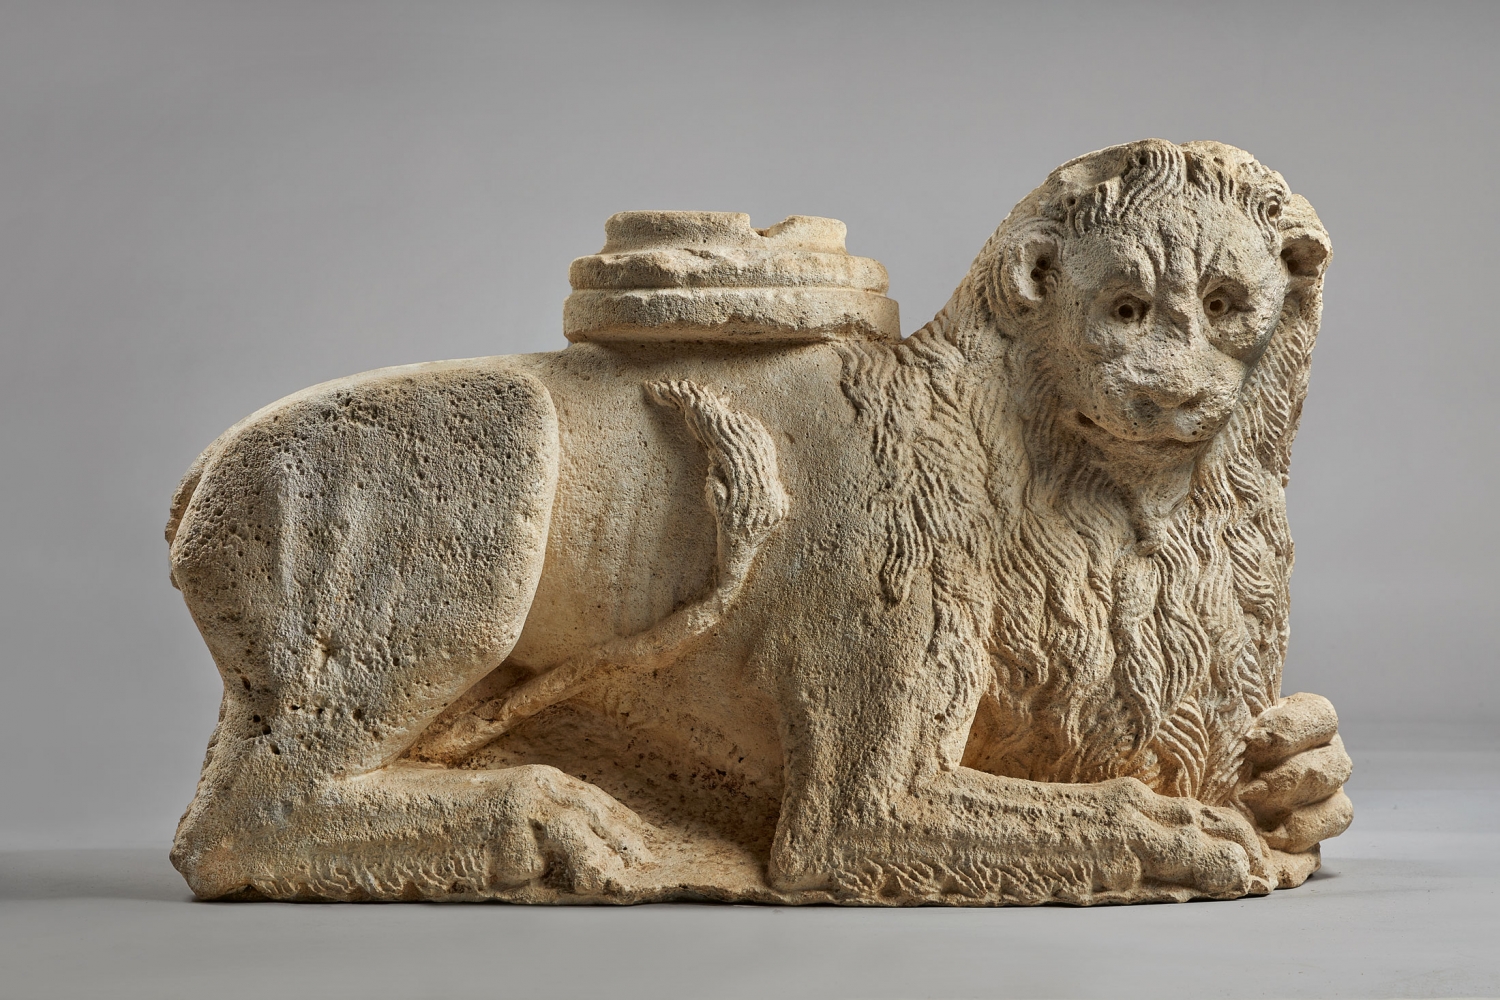 Two monumental lions with carving on reverse from a 2nd century Roman triumphal arch, c. 1200- 1250
Central Italy
Metamorphic limestone; originally from the entrance to a church
Lion with carving on reverse: 22.8 x 36 x 11.8 inches (58 x 92 x 30 cm)
Lion with uncarved reverse: 23.5 x 33.5 x 11.4 inches (60 x 85 x 29 cm)